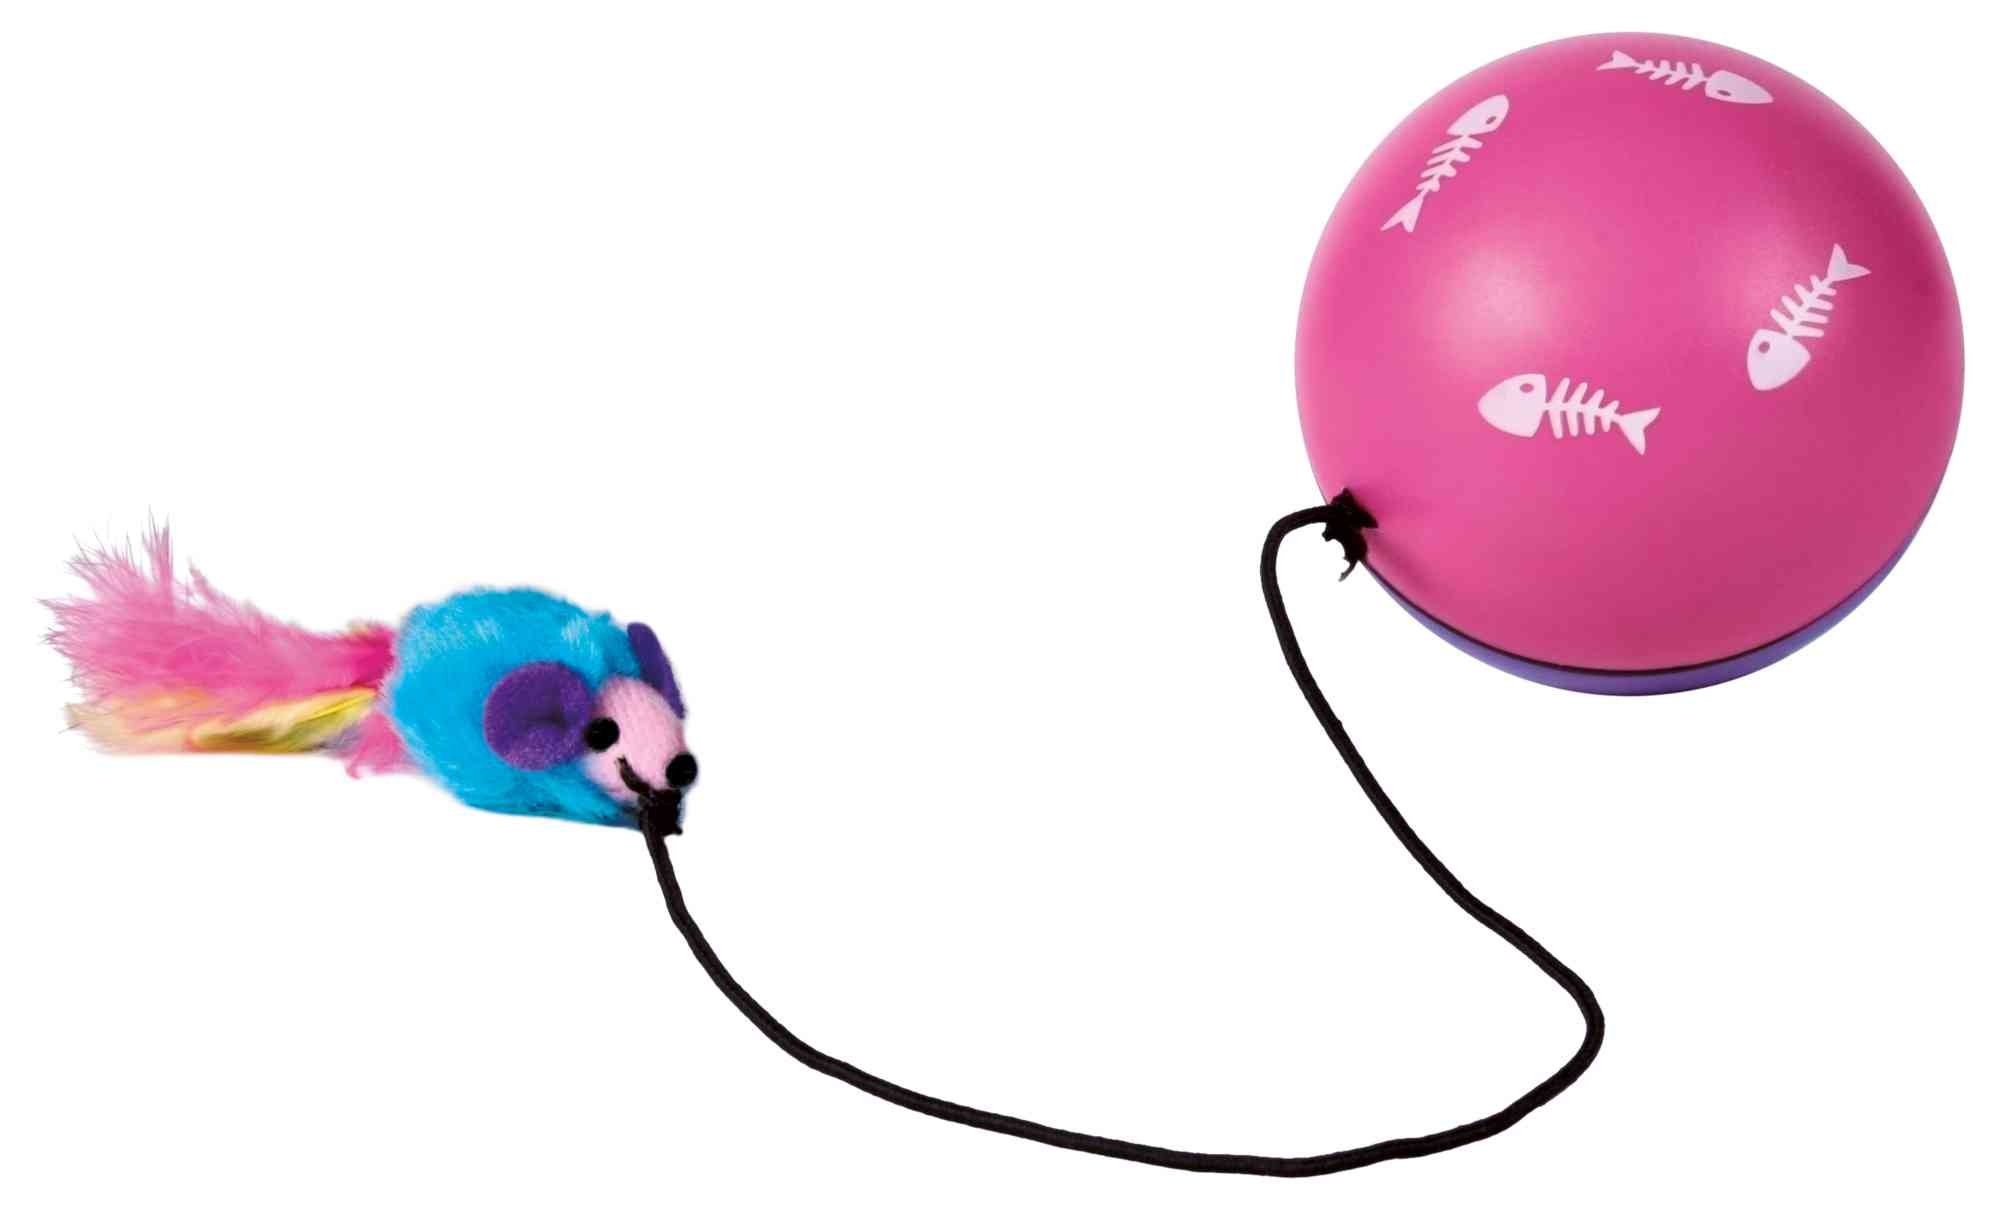 TURBINIO BALL WITH MOTOR AND MOUSE